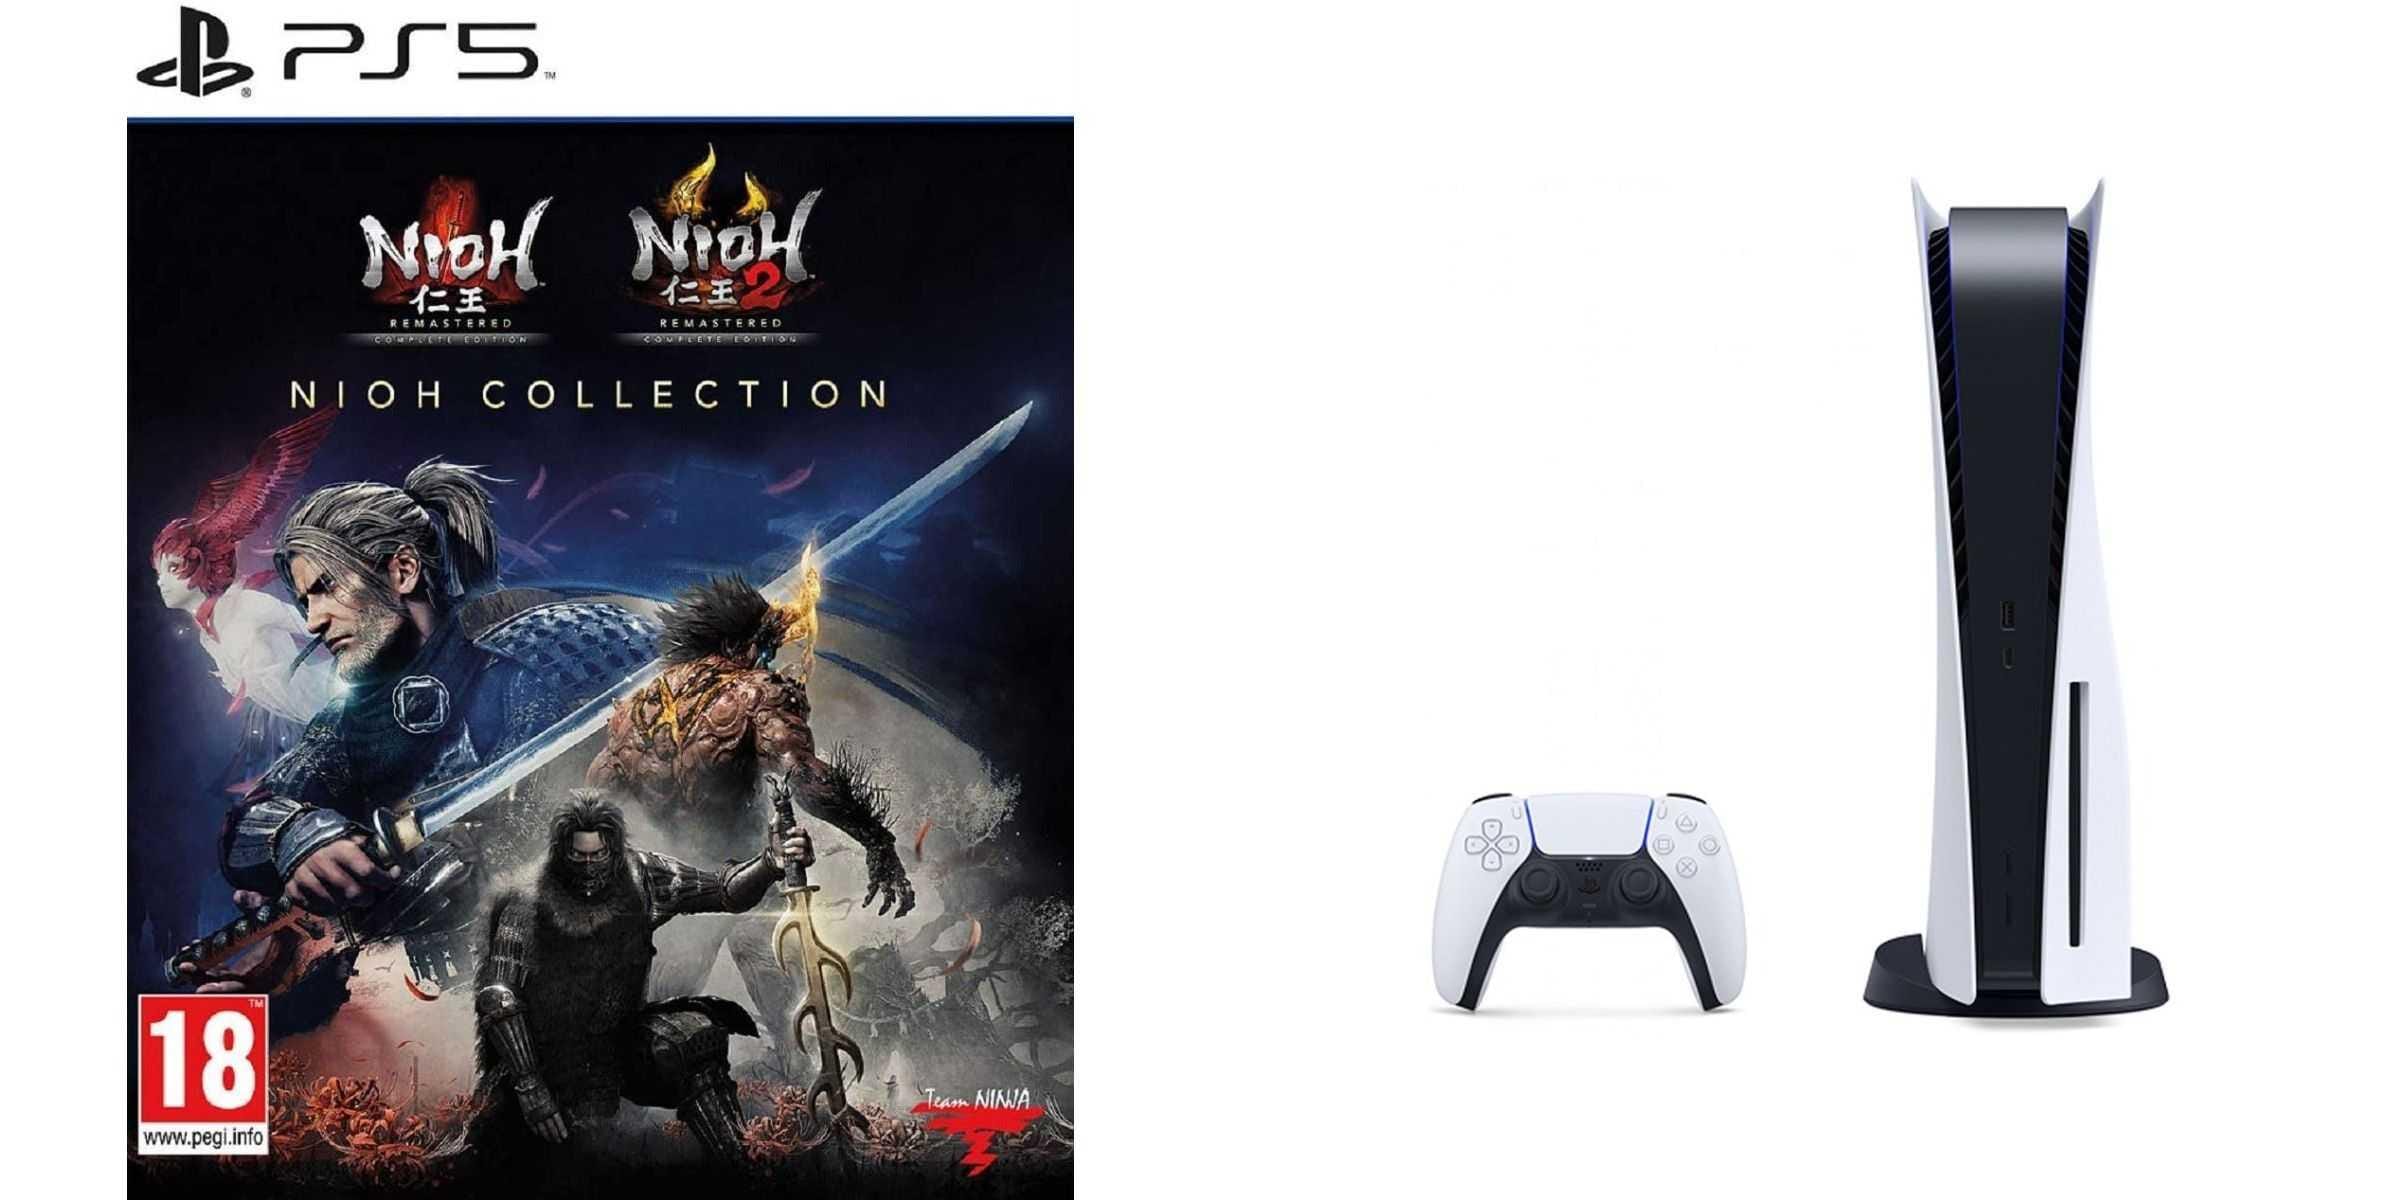 Sony PlayStation 5, 1 Wireless Controller, White - CFI-1016A01 MEE, with Nioh Collection for PlayStation 5